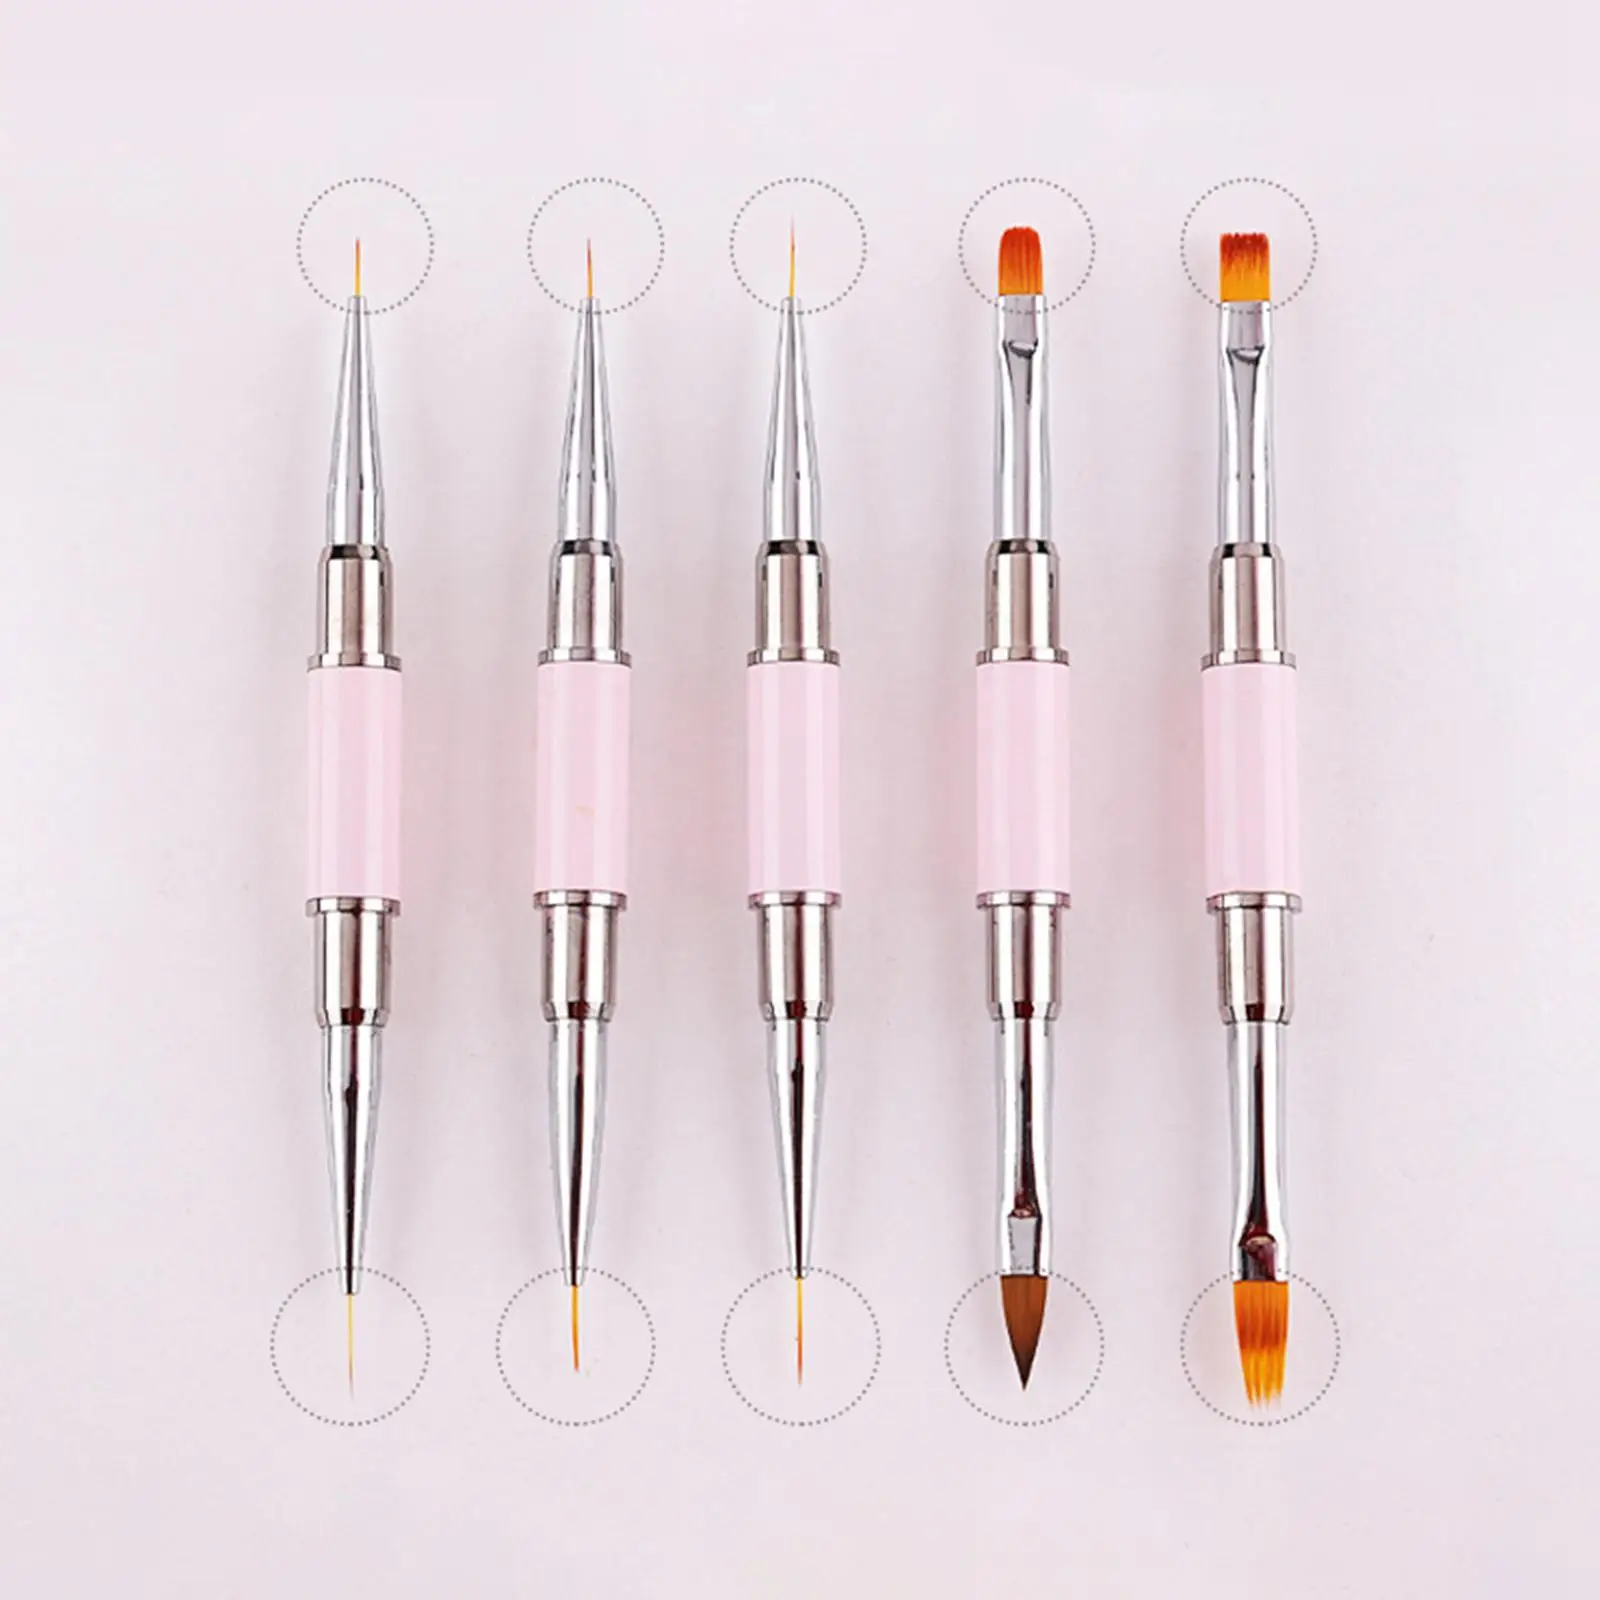 5x Dual Ended Nail Art Brushes Set DIY Manicure Tools Nail Art Painting Nail Liner Brush for Home Use DIY Manicure Salon